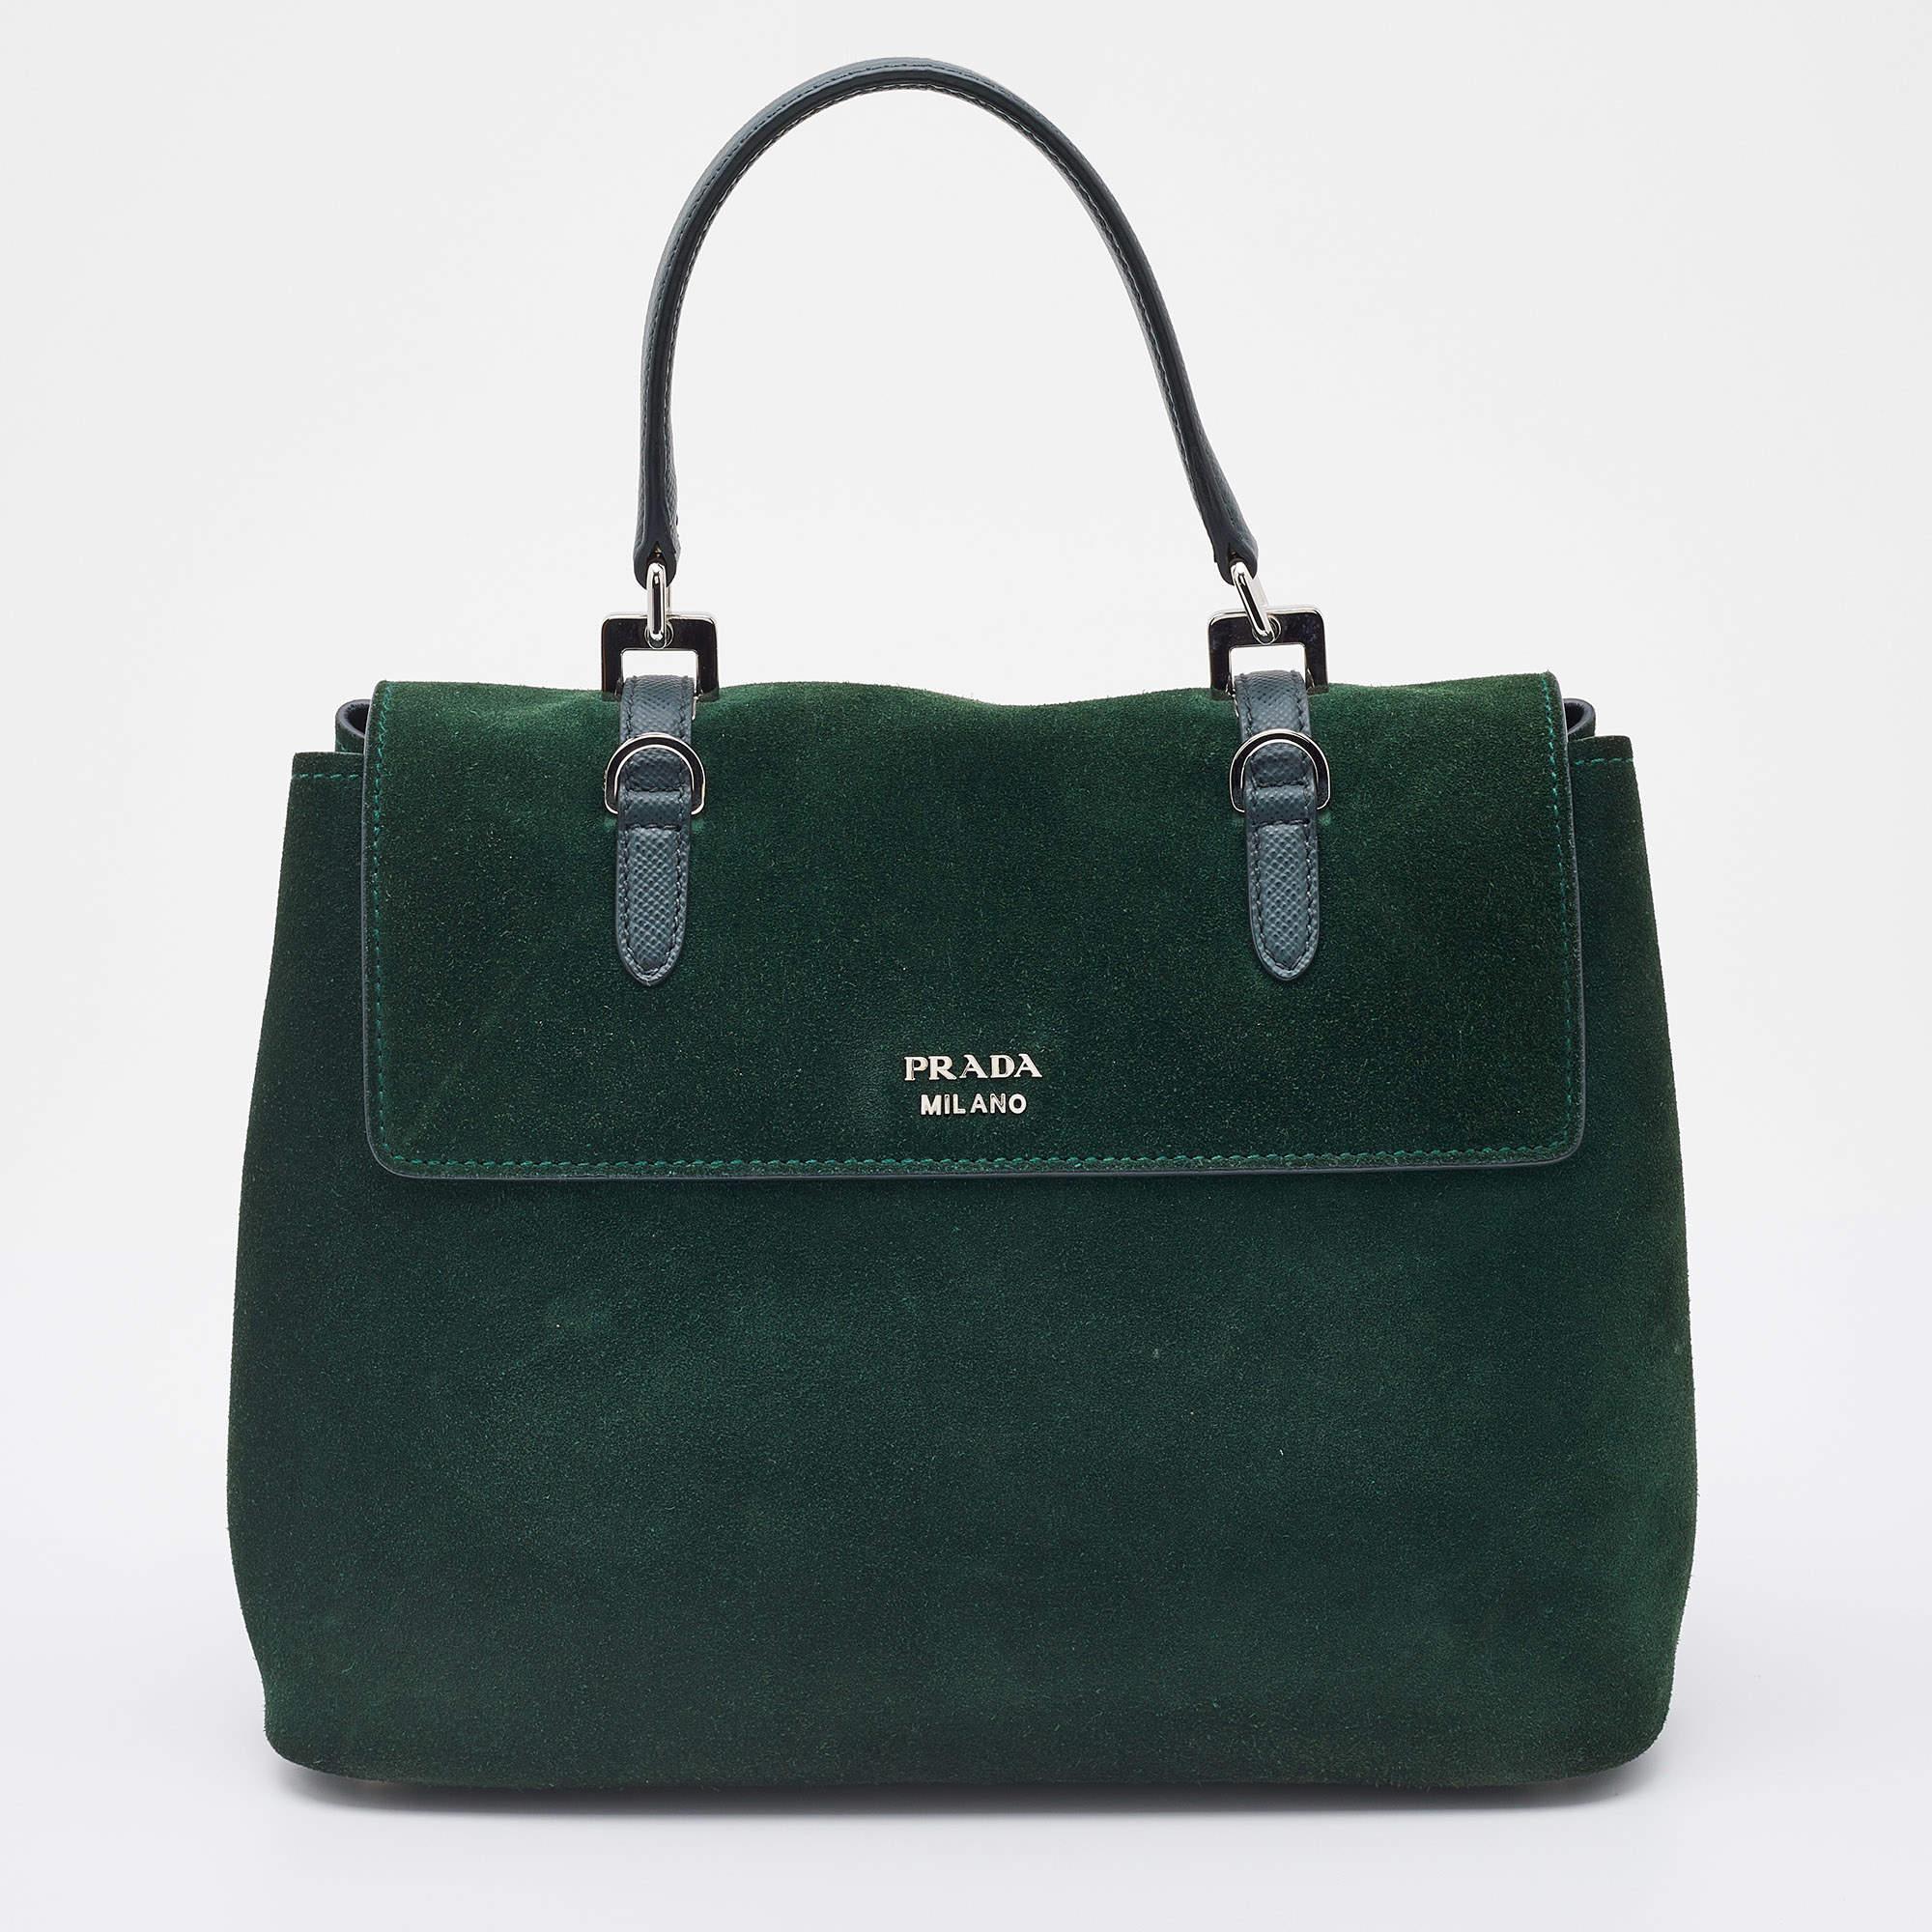 This stylish bag from Prada has been crafted from suede. The top opens to a capacious interior that can easily hold your everyday essentials. The bag is finished with silver-tone hardware and a top handle.

Includes: Original Dustbag, Detachable